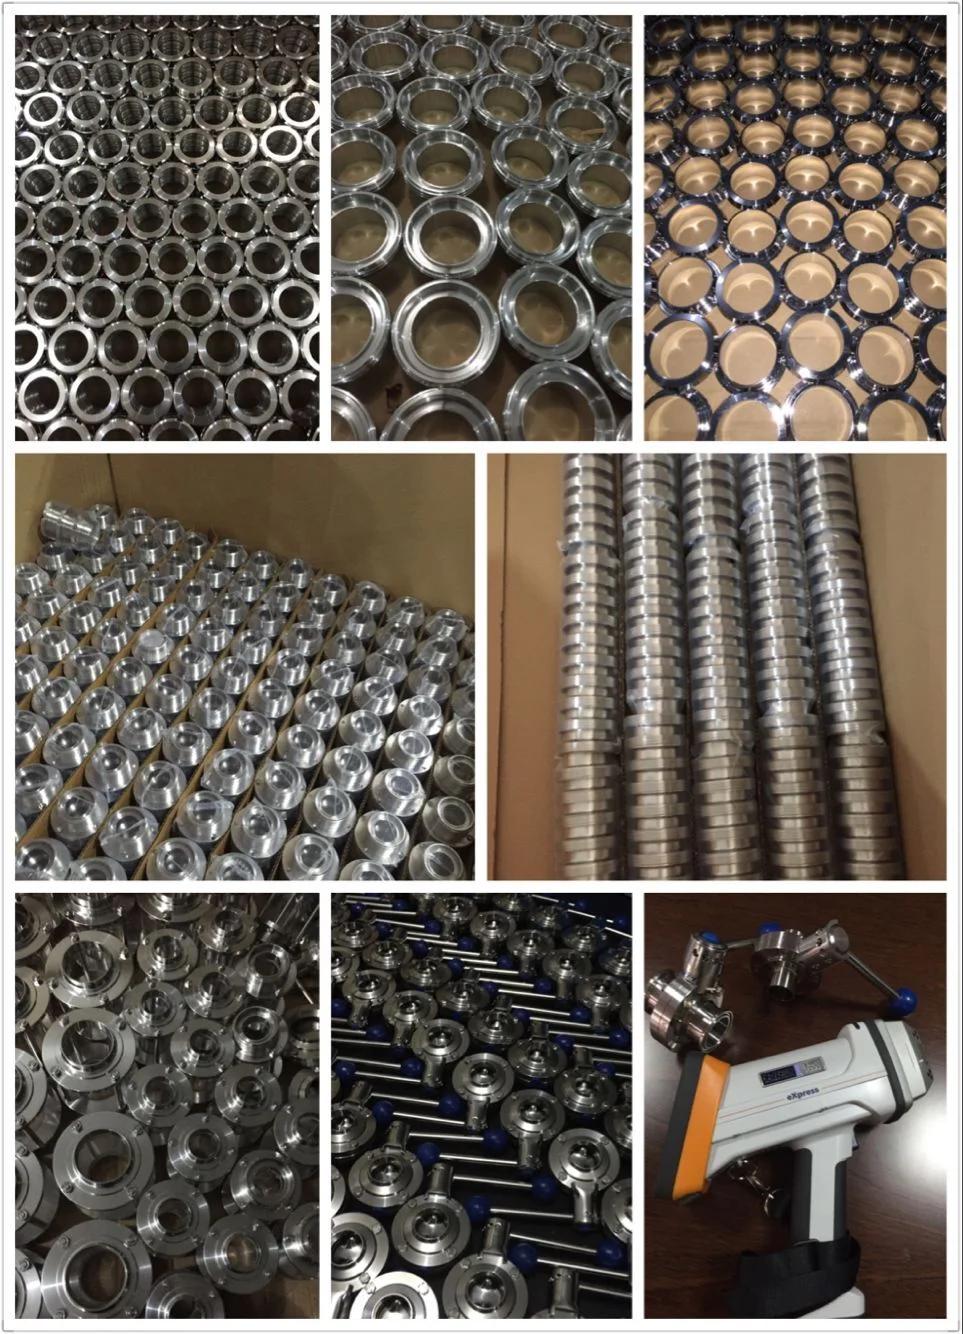 Supplier of SS304&SS316L Sanitary Stainless Steel Fittings Elbow Reducer Tee Cross